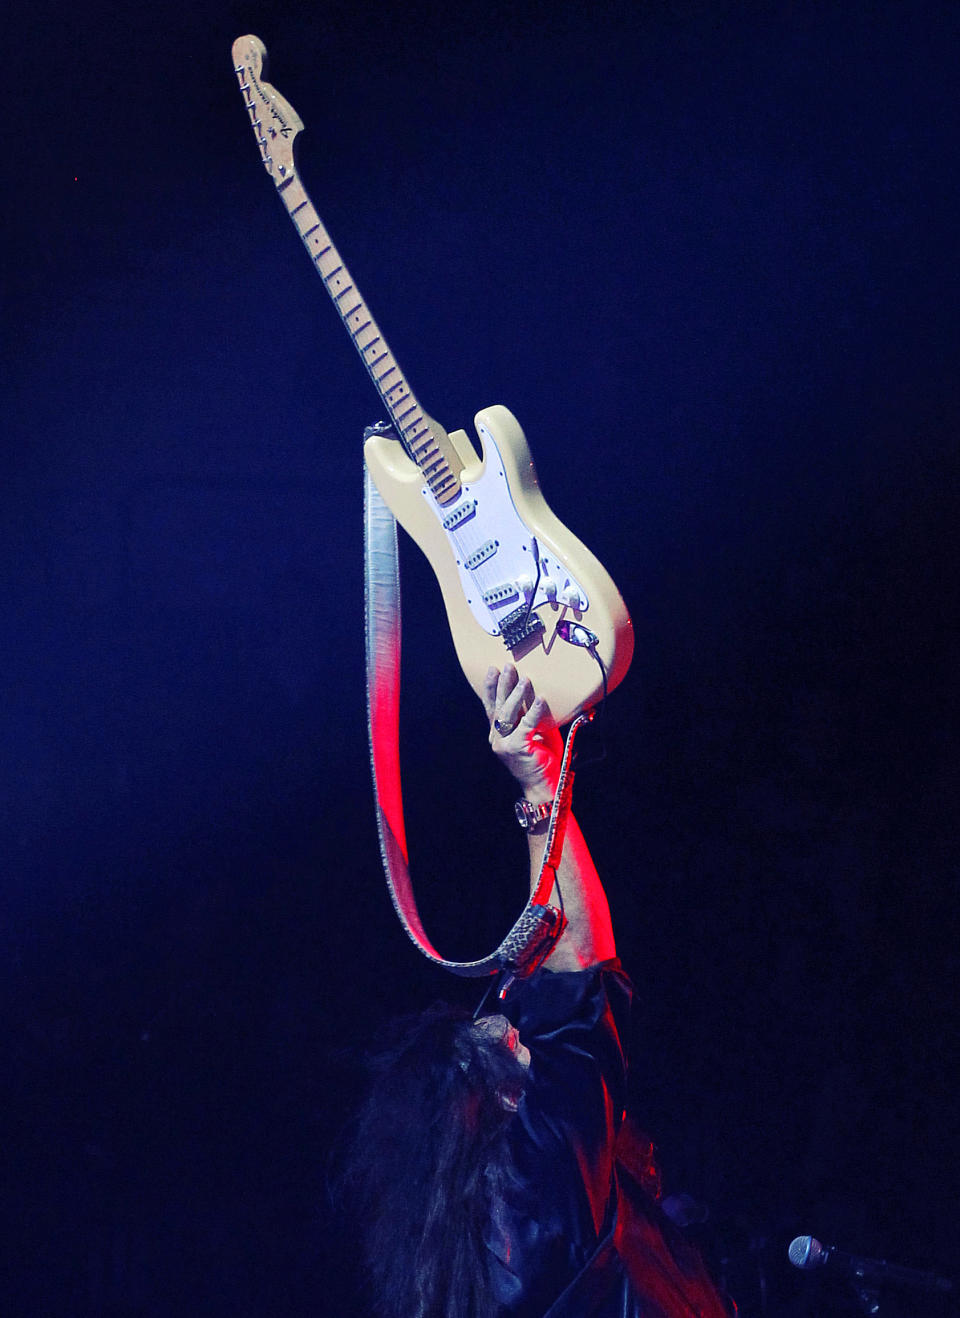 Swedish guitar virtuoso Yngwie Malmsteen holds his Fender Stratocaster up as he finishes his performance at Wembley Arena in London on Saturday, Sept. 22, 2012. Commenting on the 60-year history of the Stratocaster, Malmsteen says, "The Strat's the original, and still the best, most beautiful, amazing, perfect electrical guitar period." (AP Photo/Matt York)